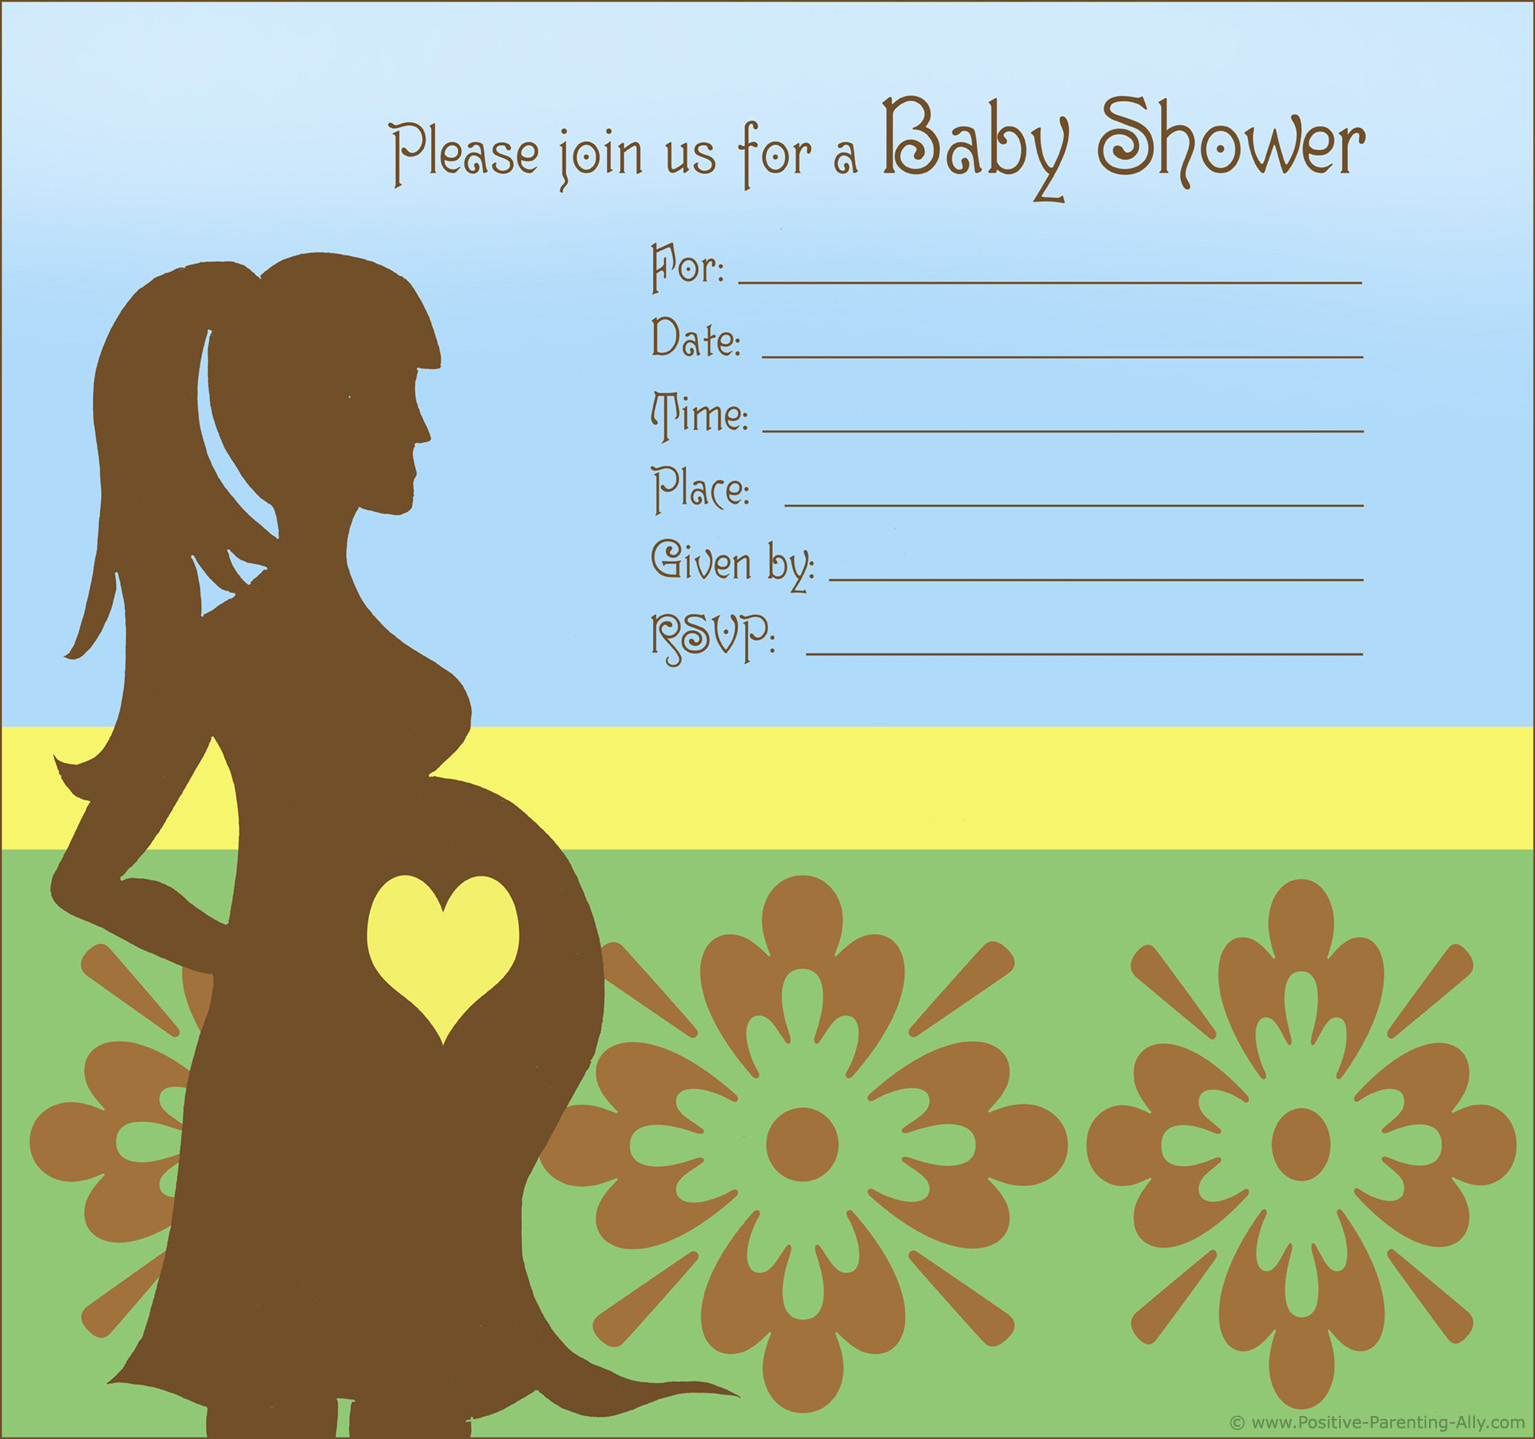 free-printable-baby-shower-invitations-in-high-quality-resolution